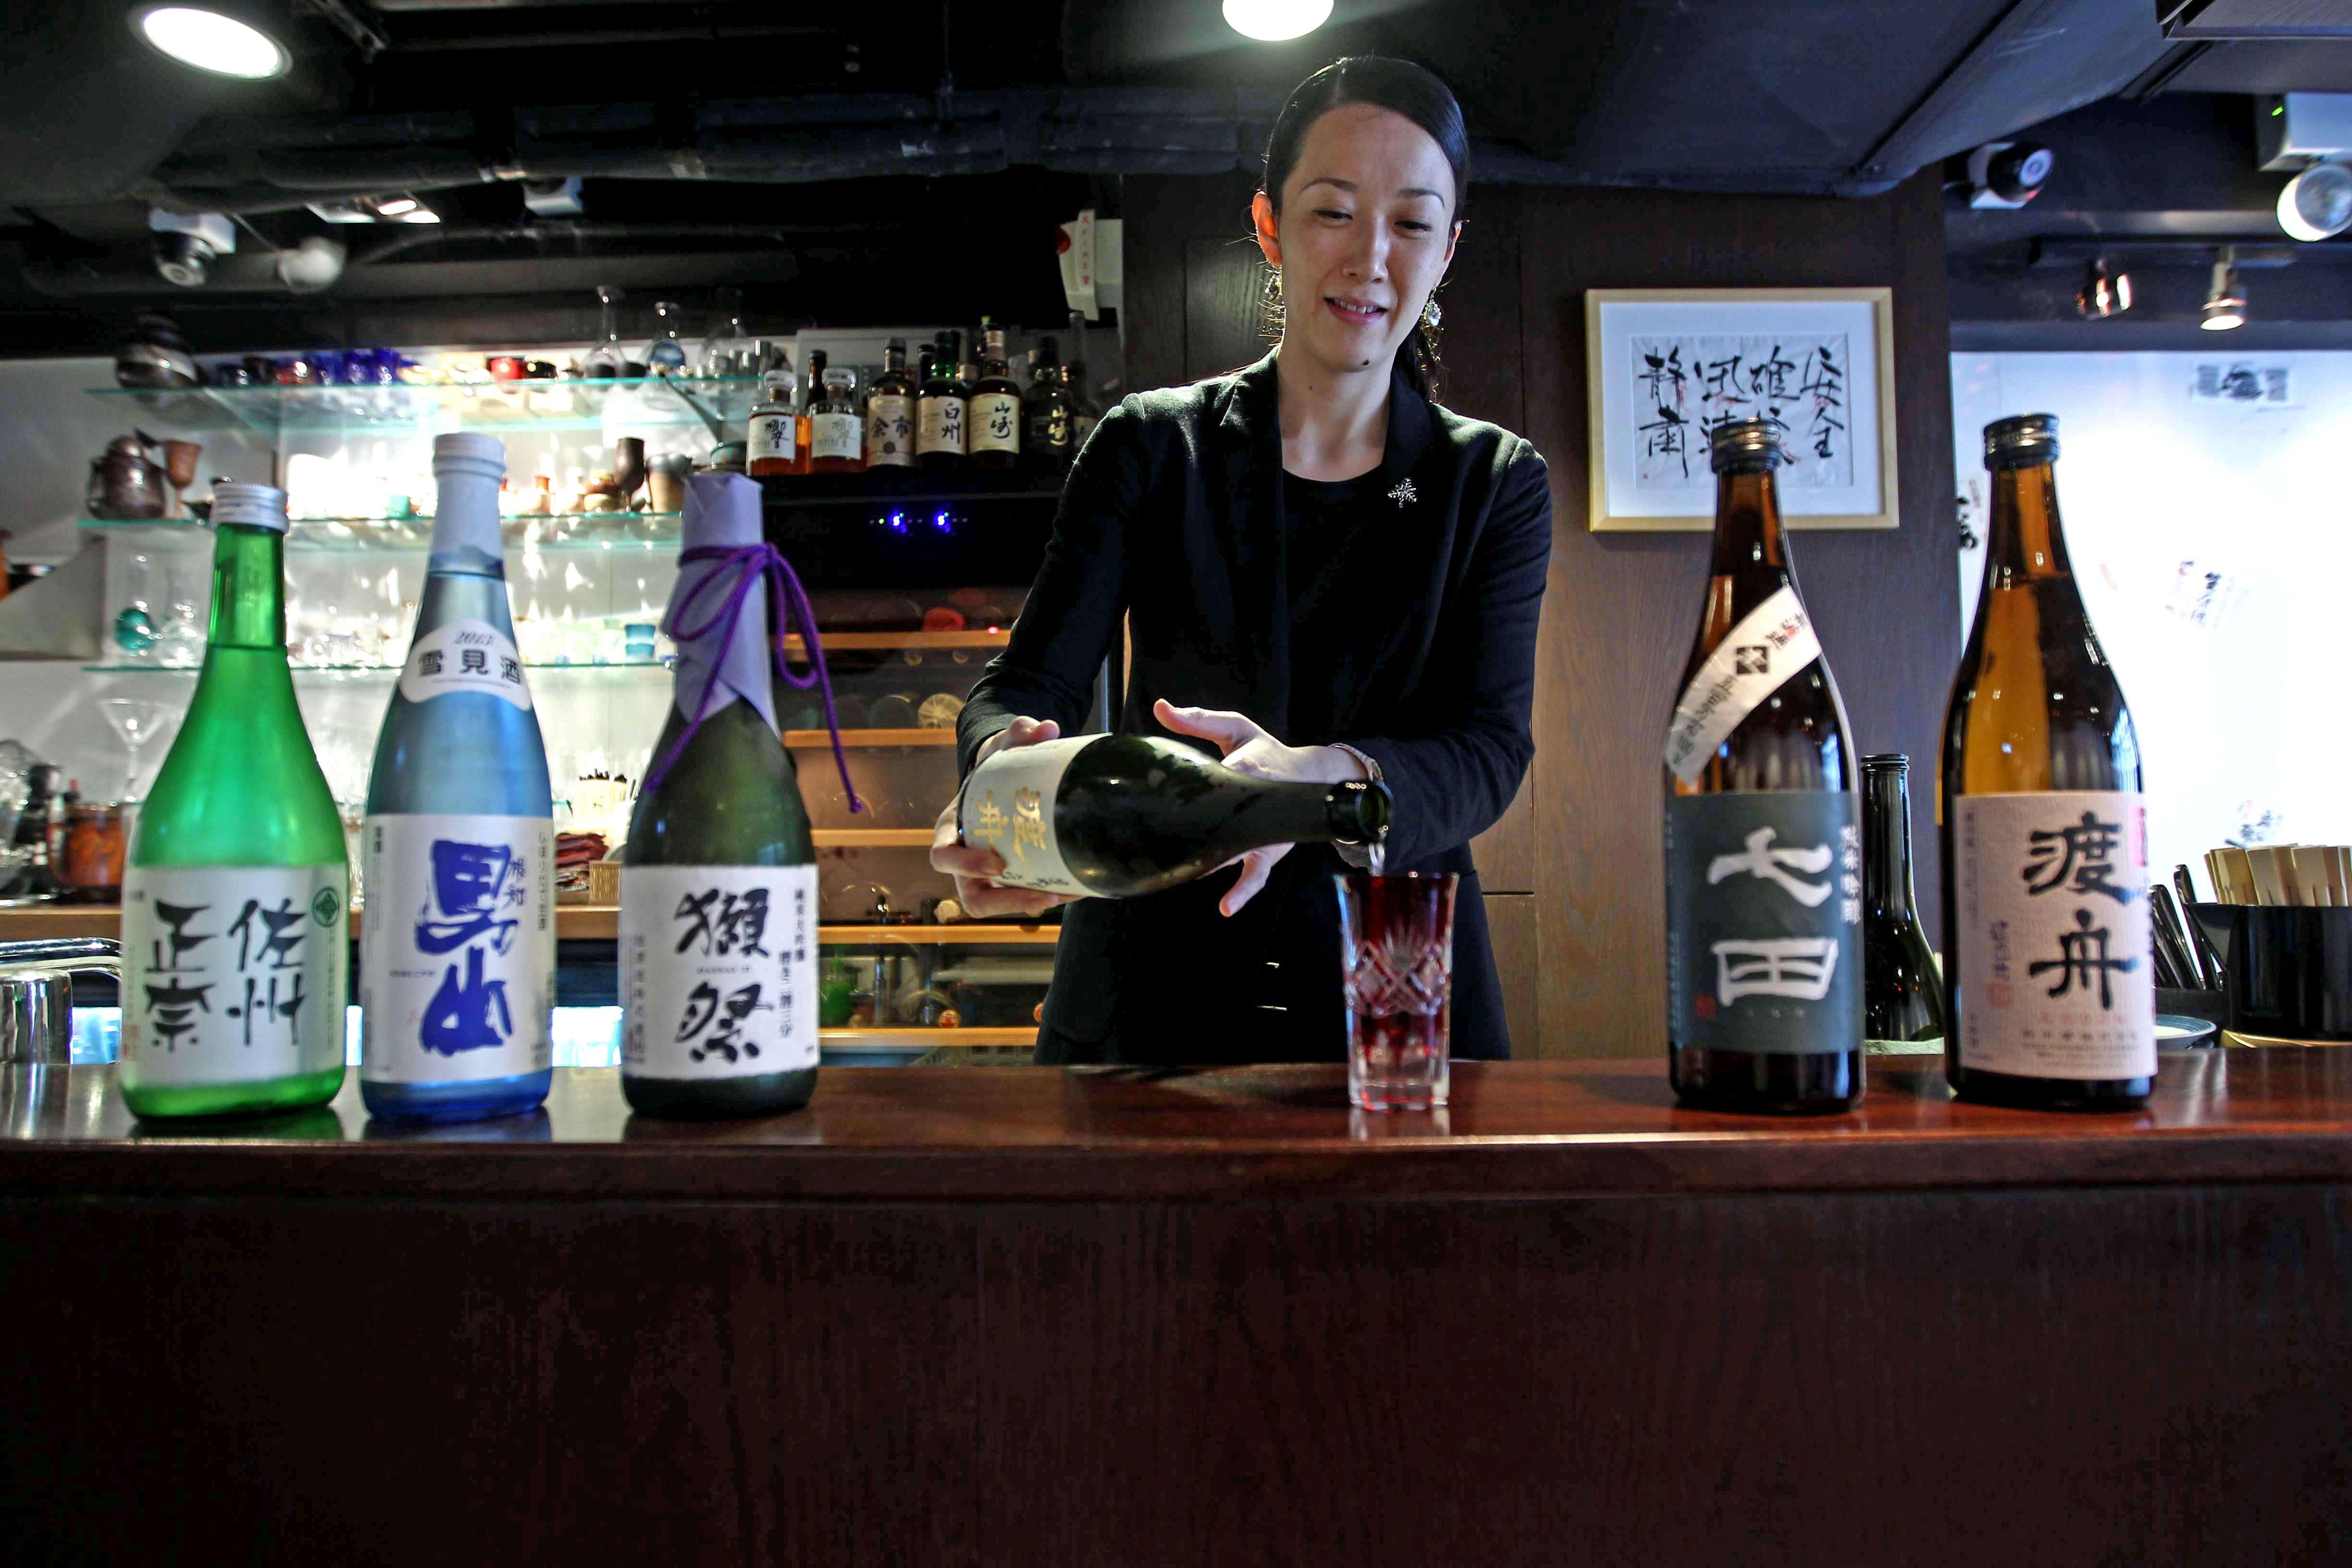 While wine is drunk with most foods in Hong Kong, sake was confined to Japanese restaurants until innovators such as Balinese restaurant Potato Head began matching it with other cuisines